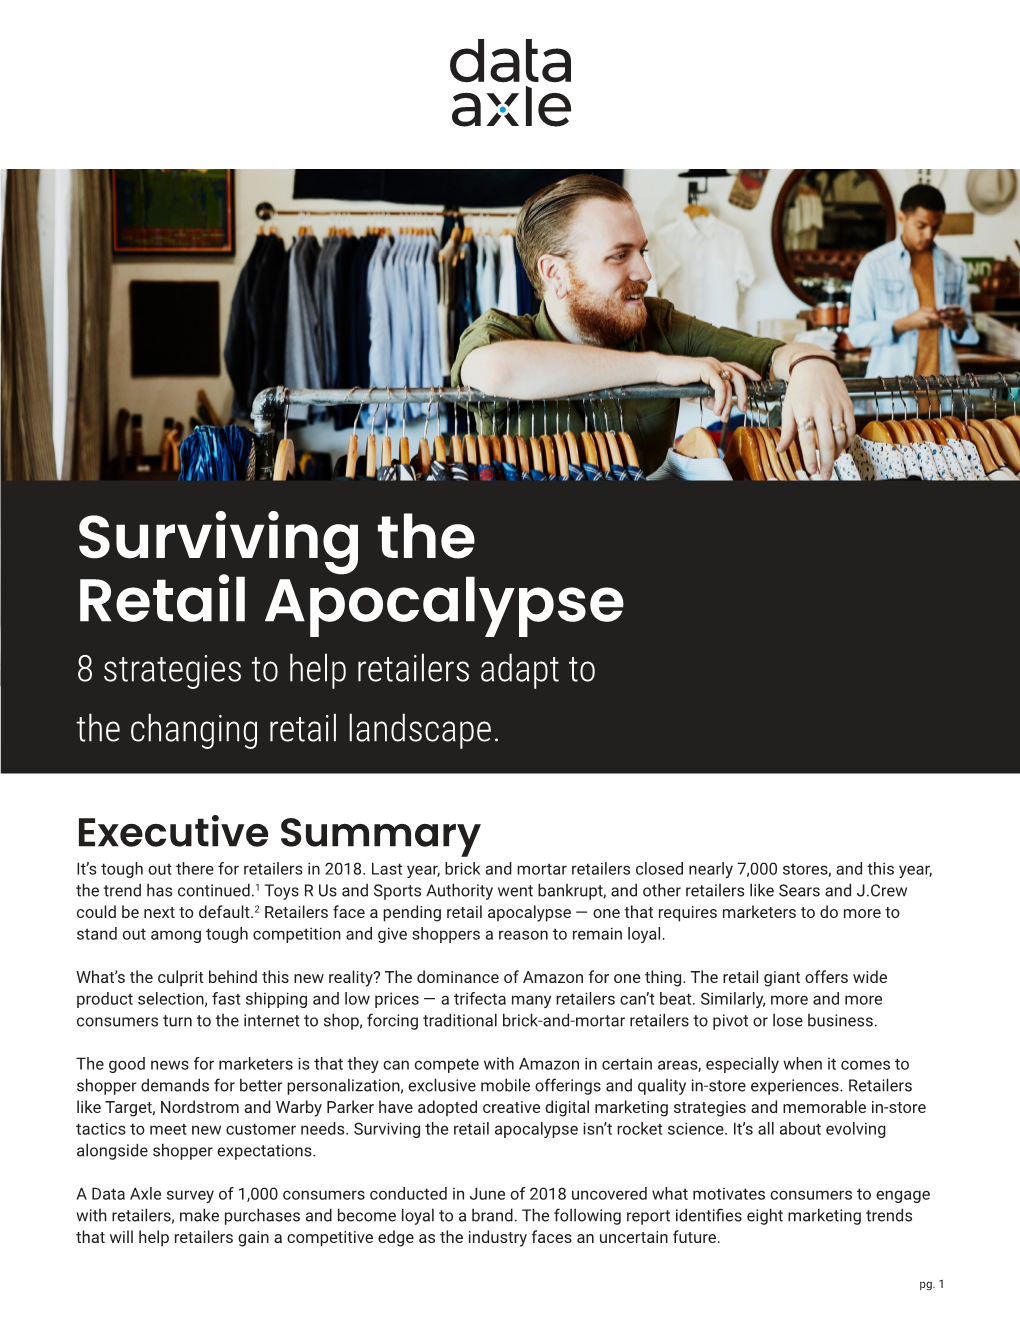 Surviving the Retail Apocalypse 8 Strategies to Help Retailers Adapt to the Changing Retail Landscape